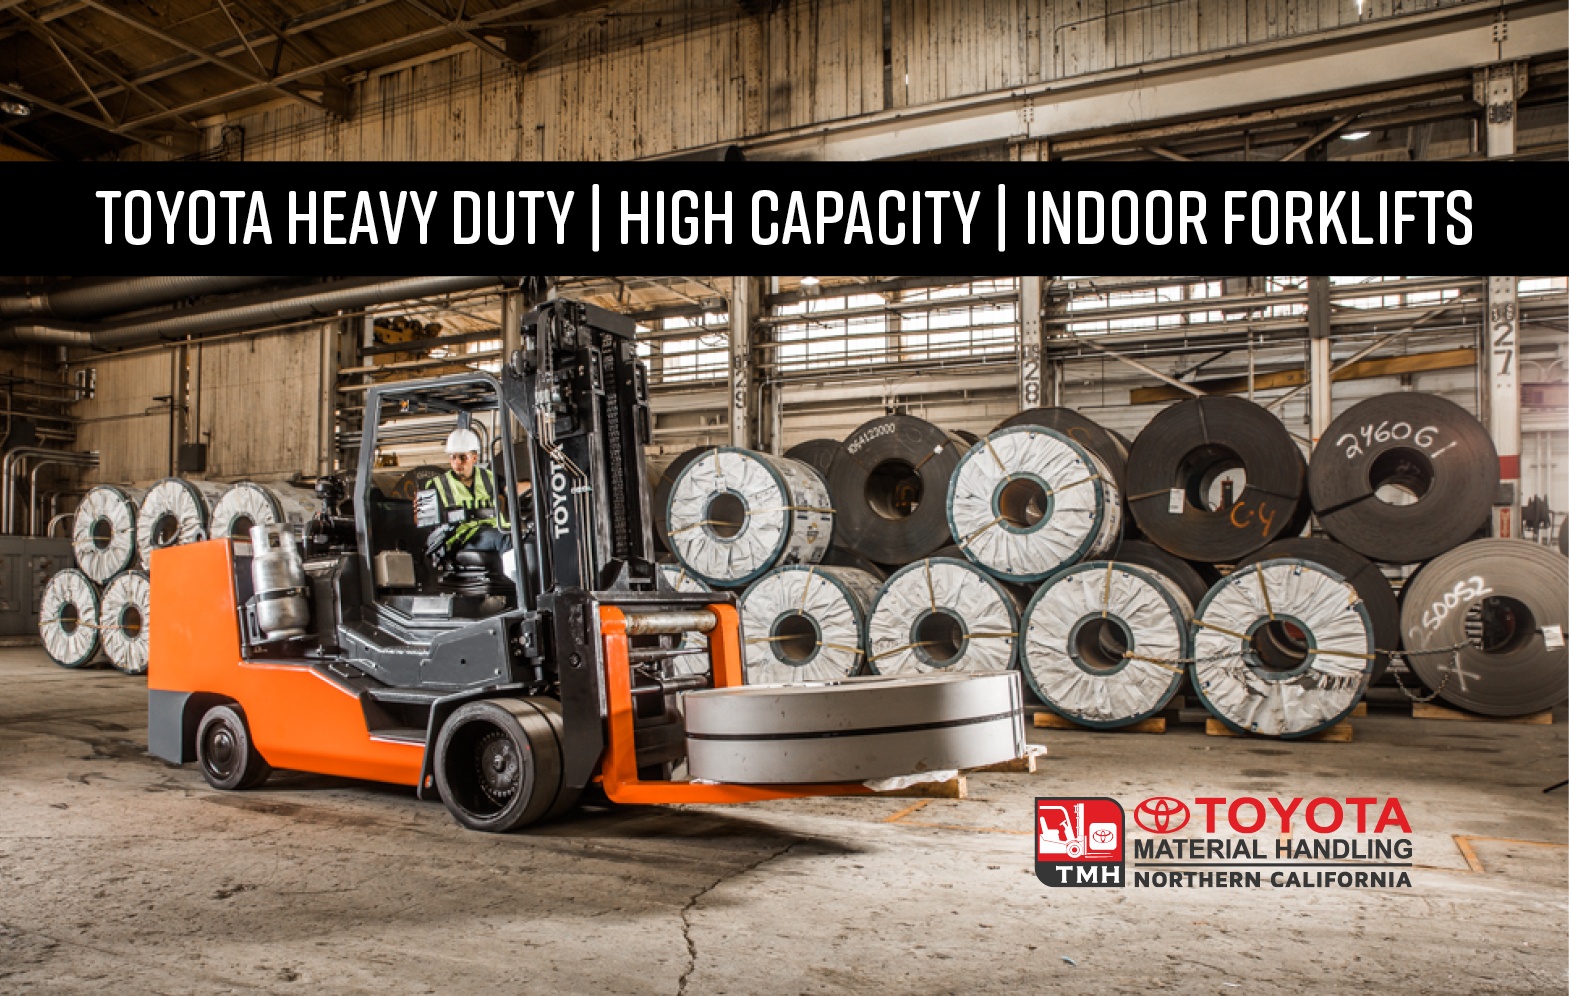 Toyota Heavy Duty | High Capacity | Indoor Forklifts